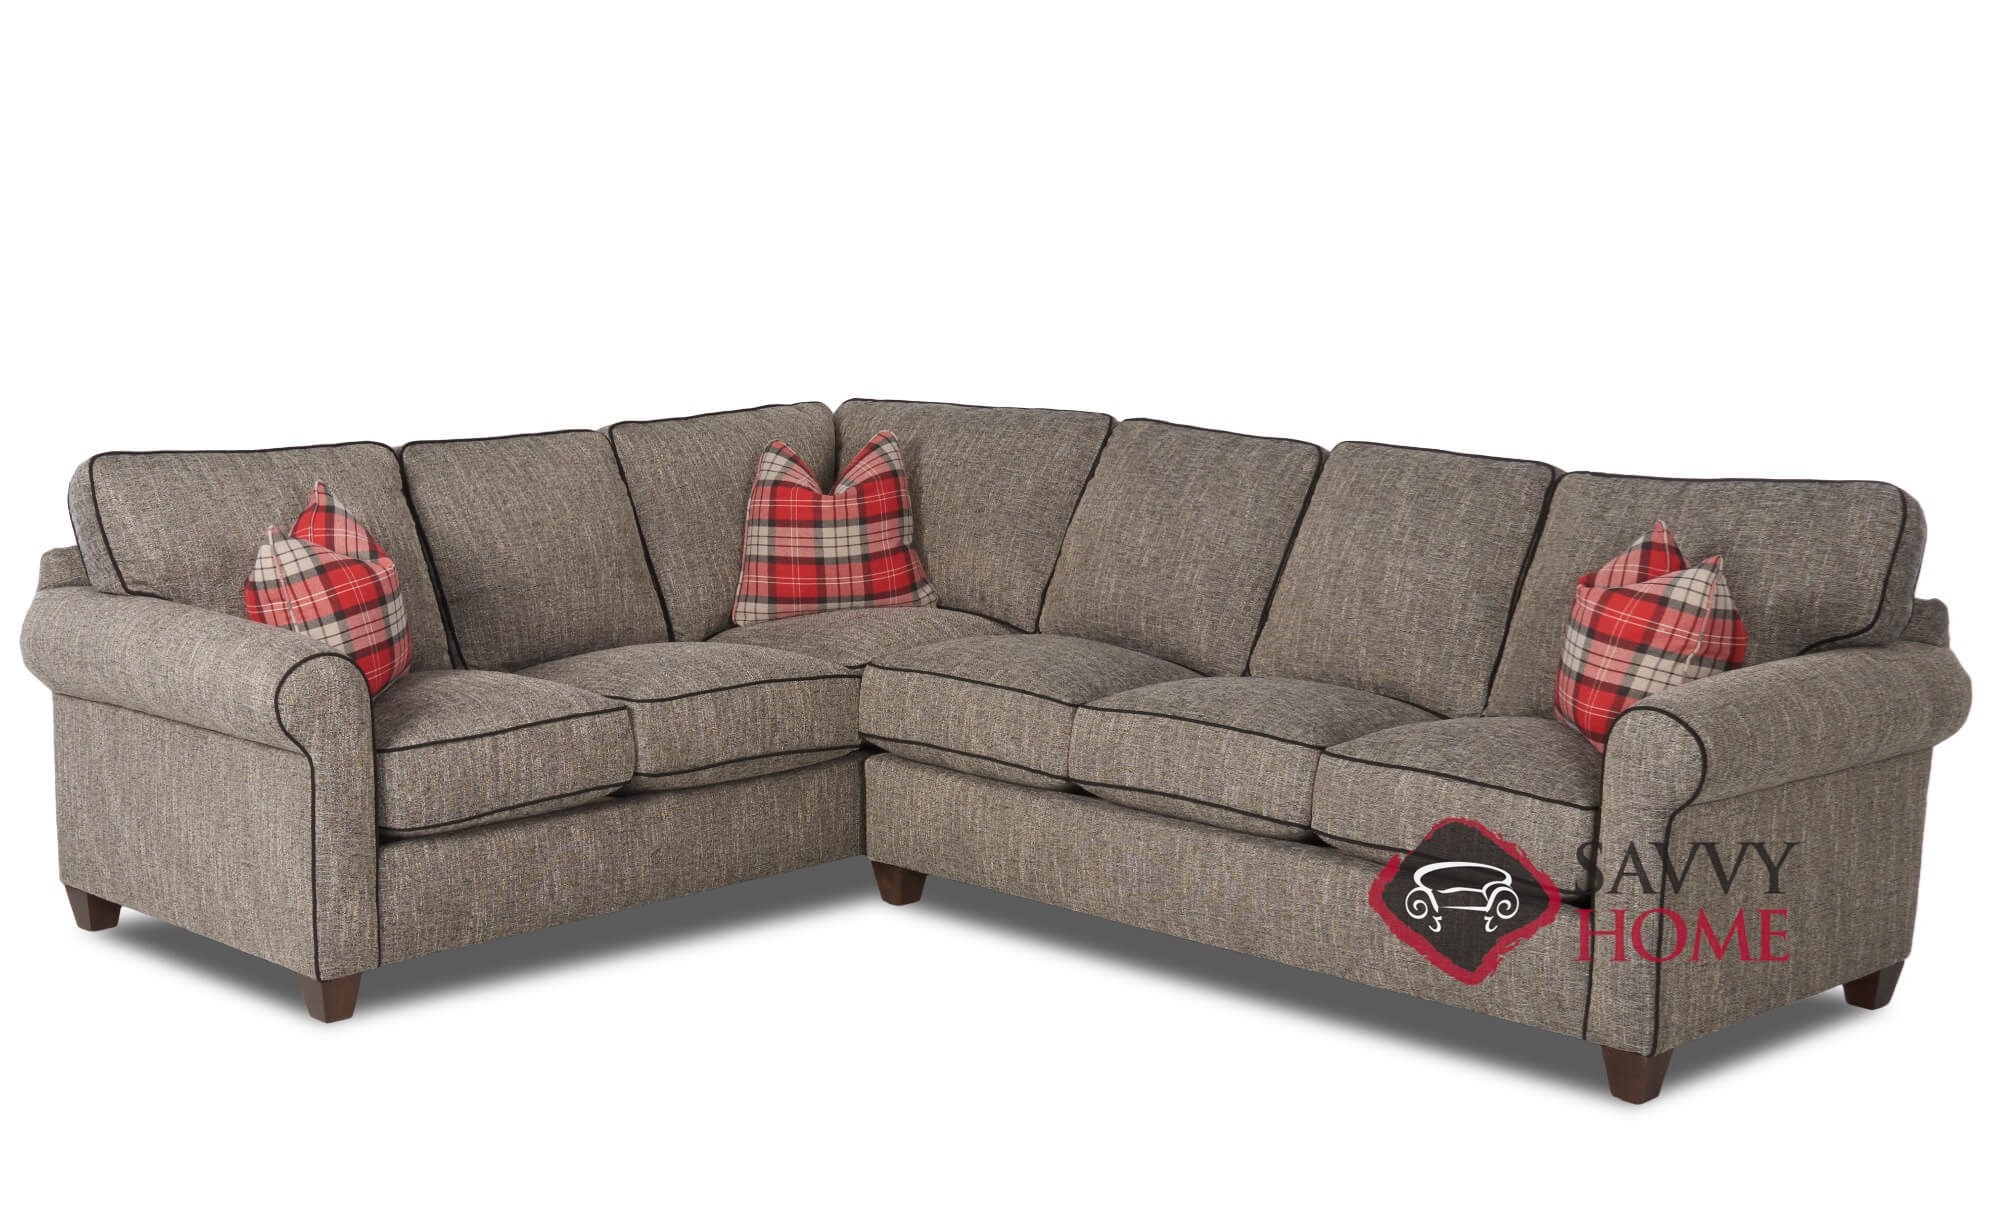 sectional le sofa bed queen size